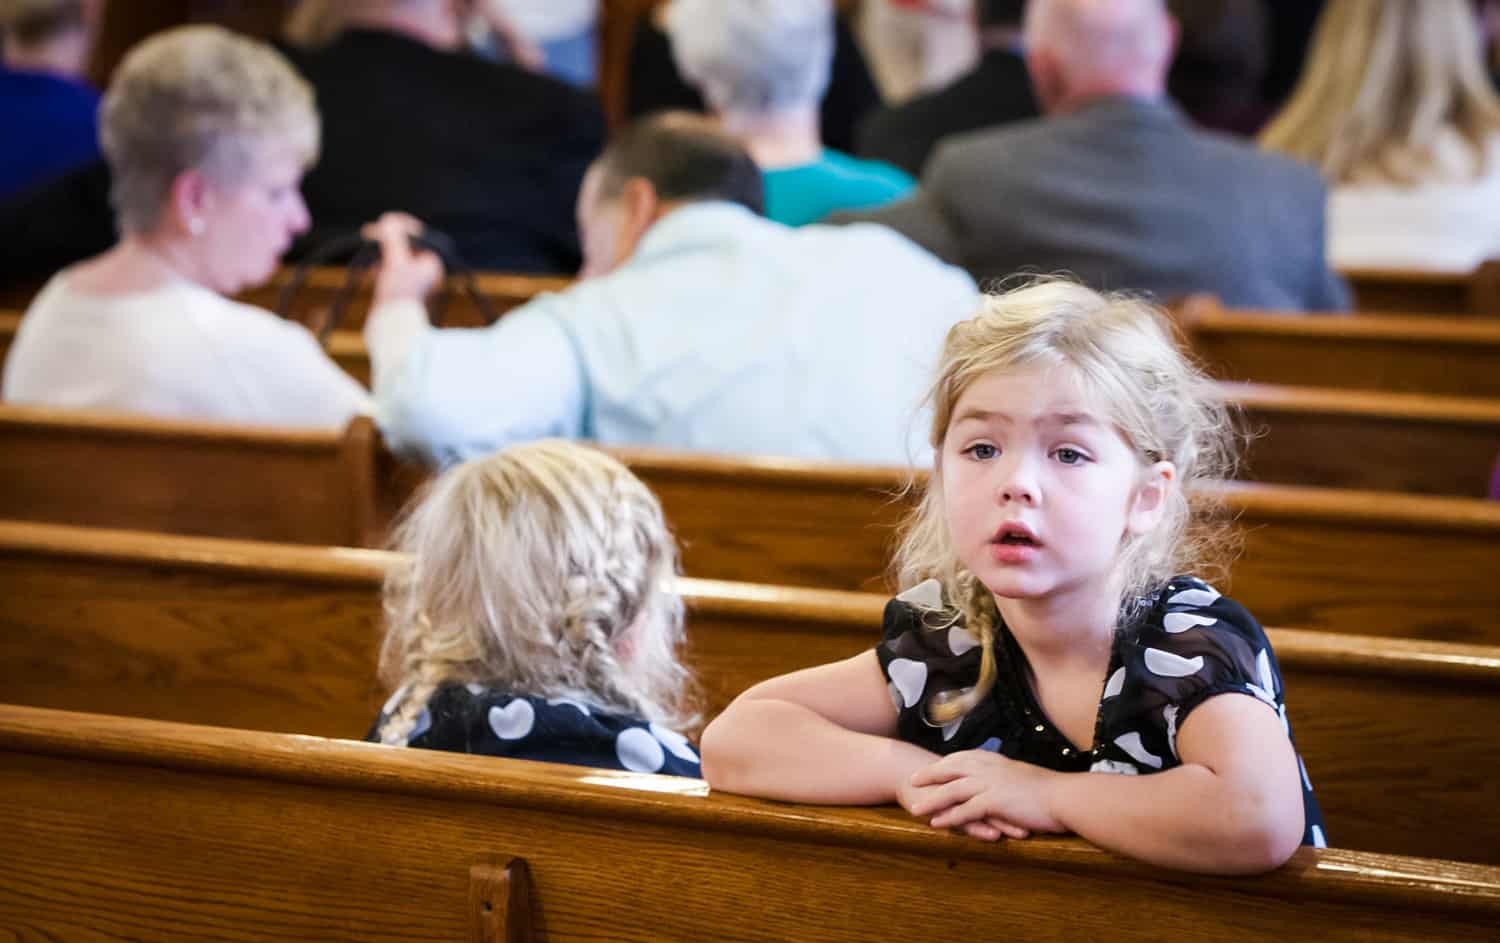 Little girl turned around in pew during wedding ceremony